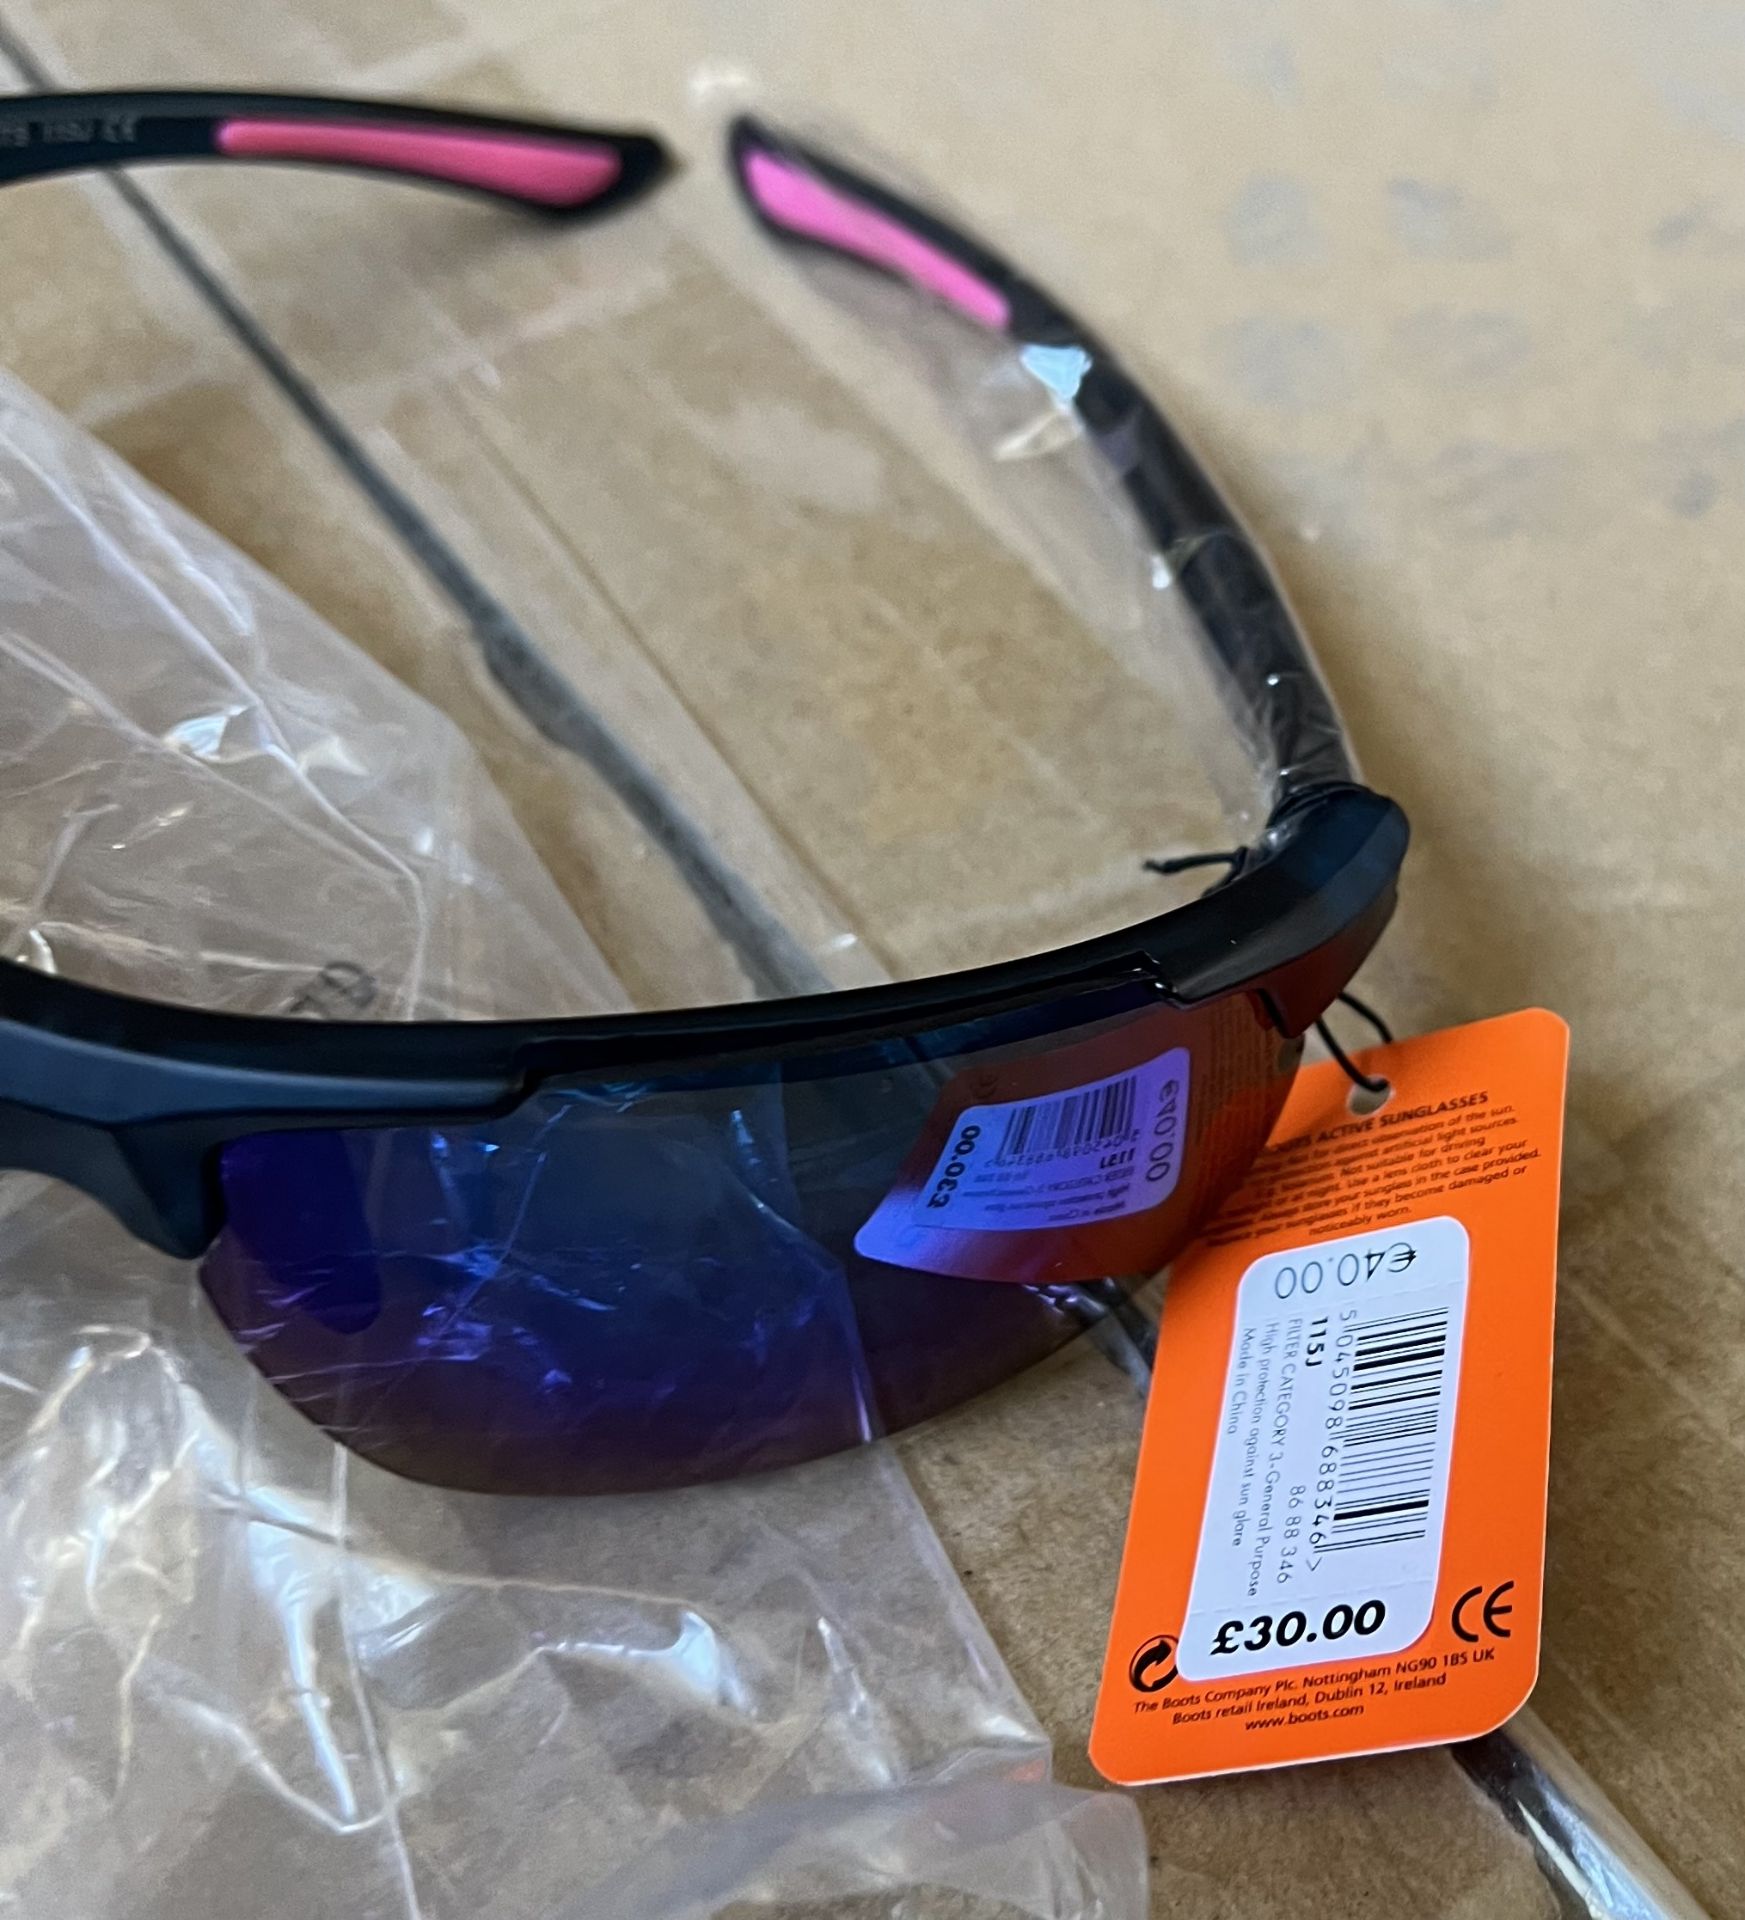 40 x Boots Active Sports Styled Sunglasses 100% UVA - (NEW) - BOOTS RRP Â£1,000 ! - Image 2 of 3